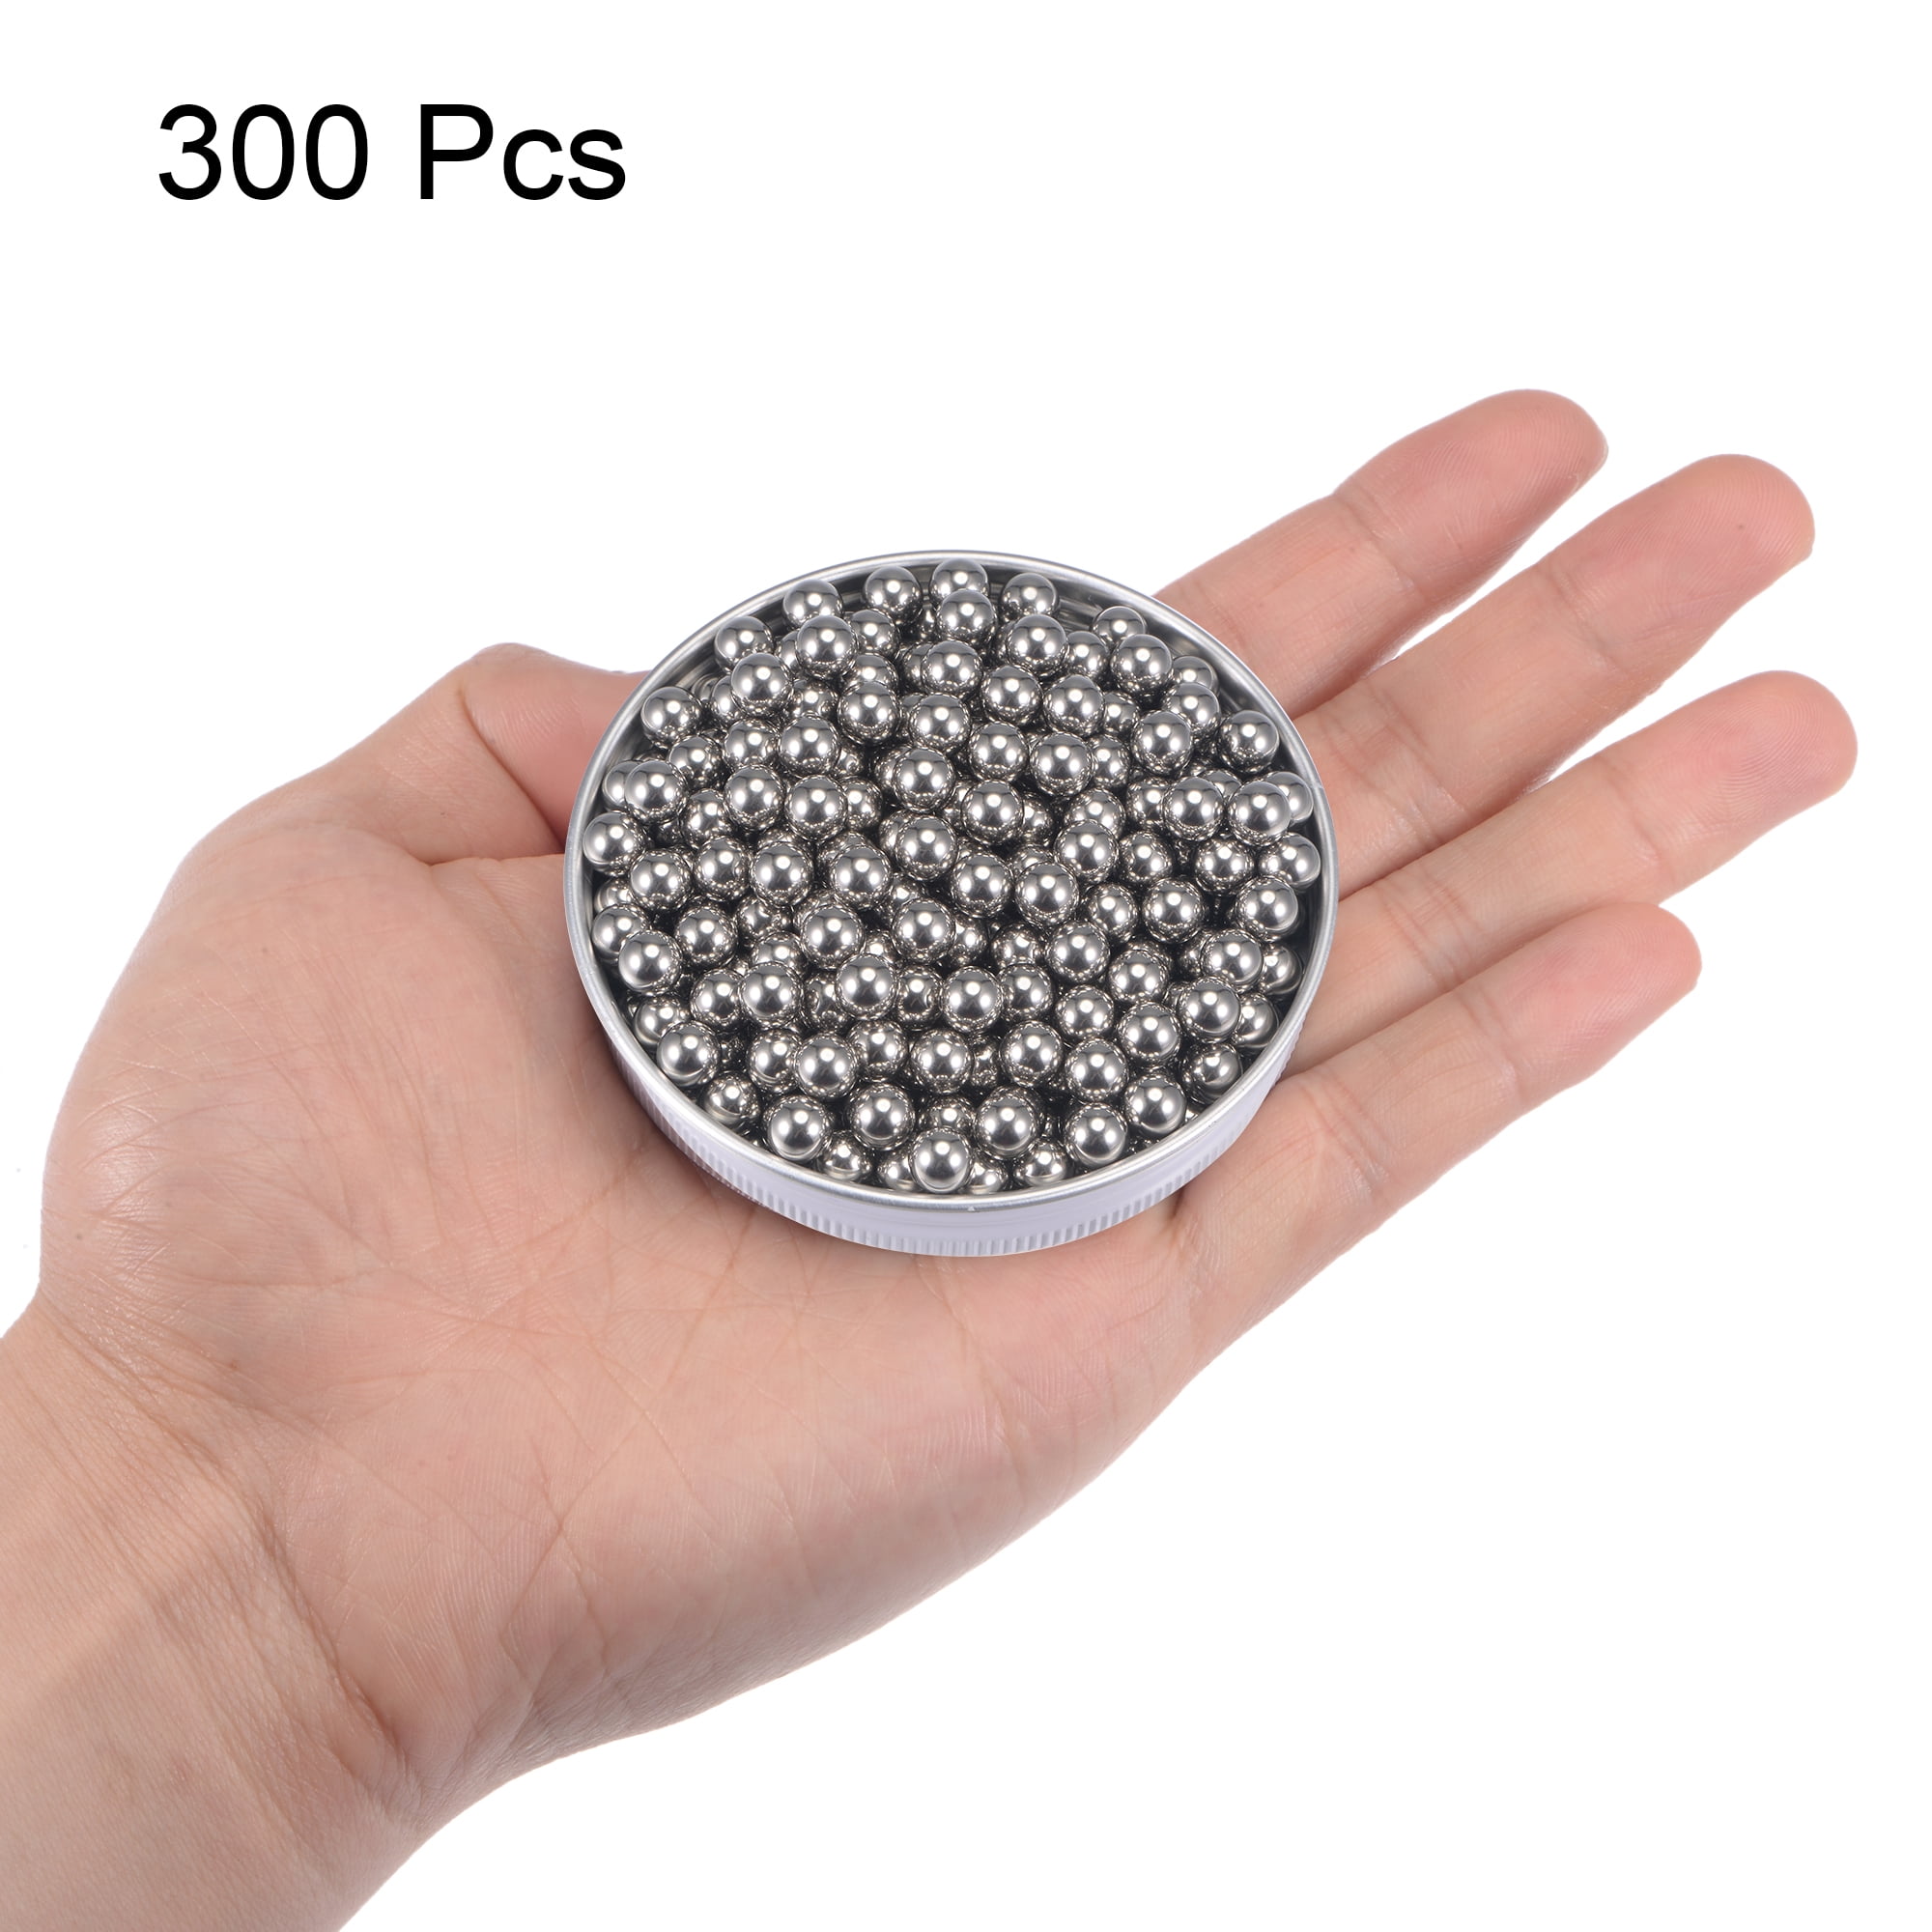 uxcell 150pcs 6mm 201 Stainless Steel Bearing Balls G200 Precision 